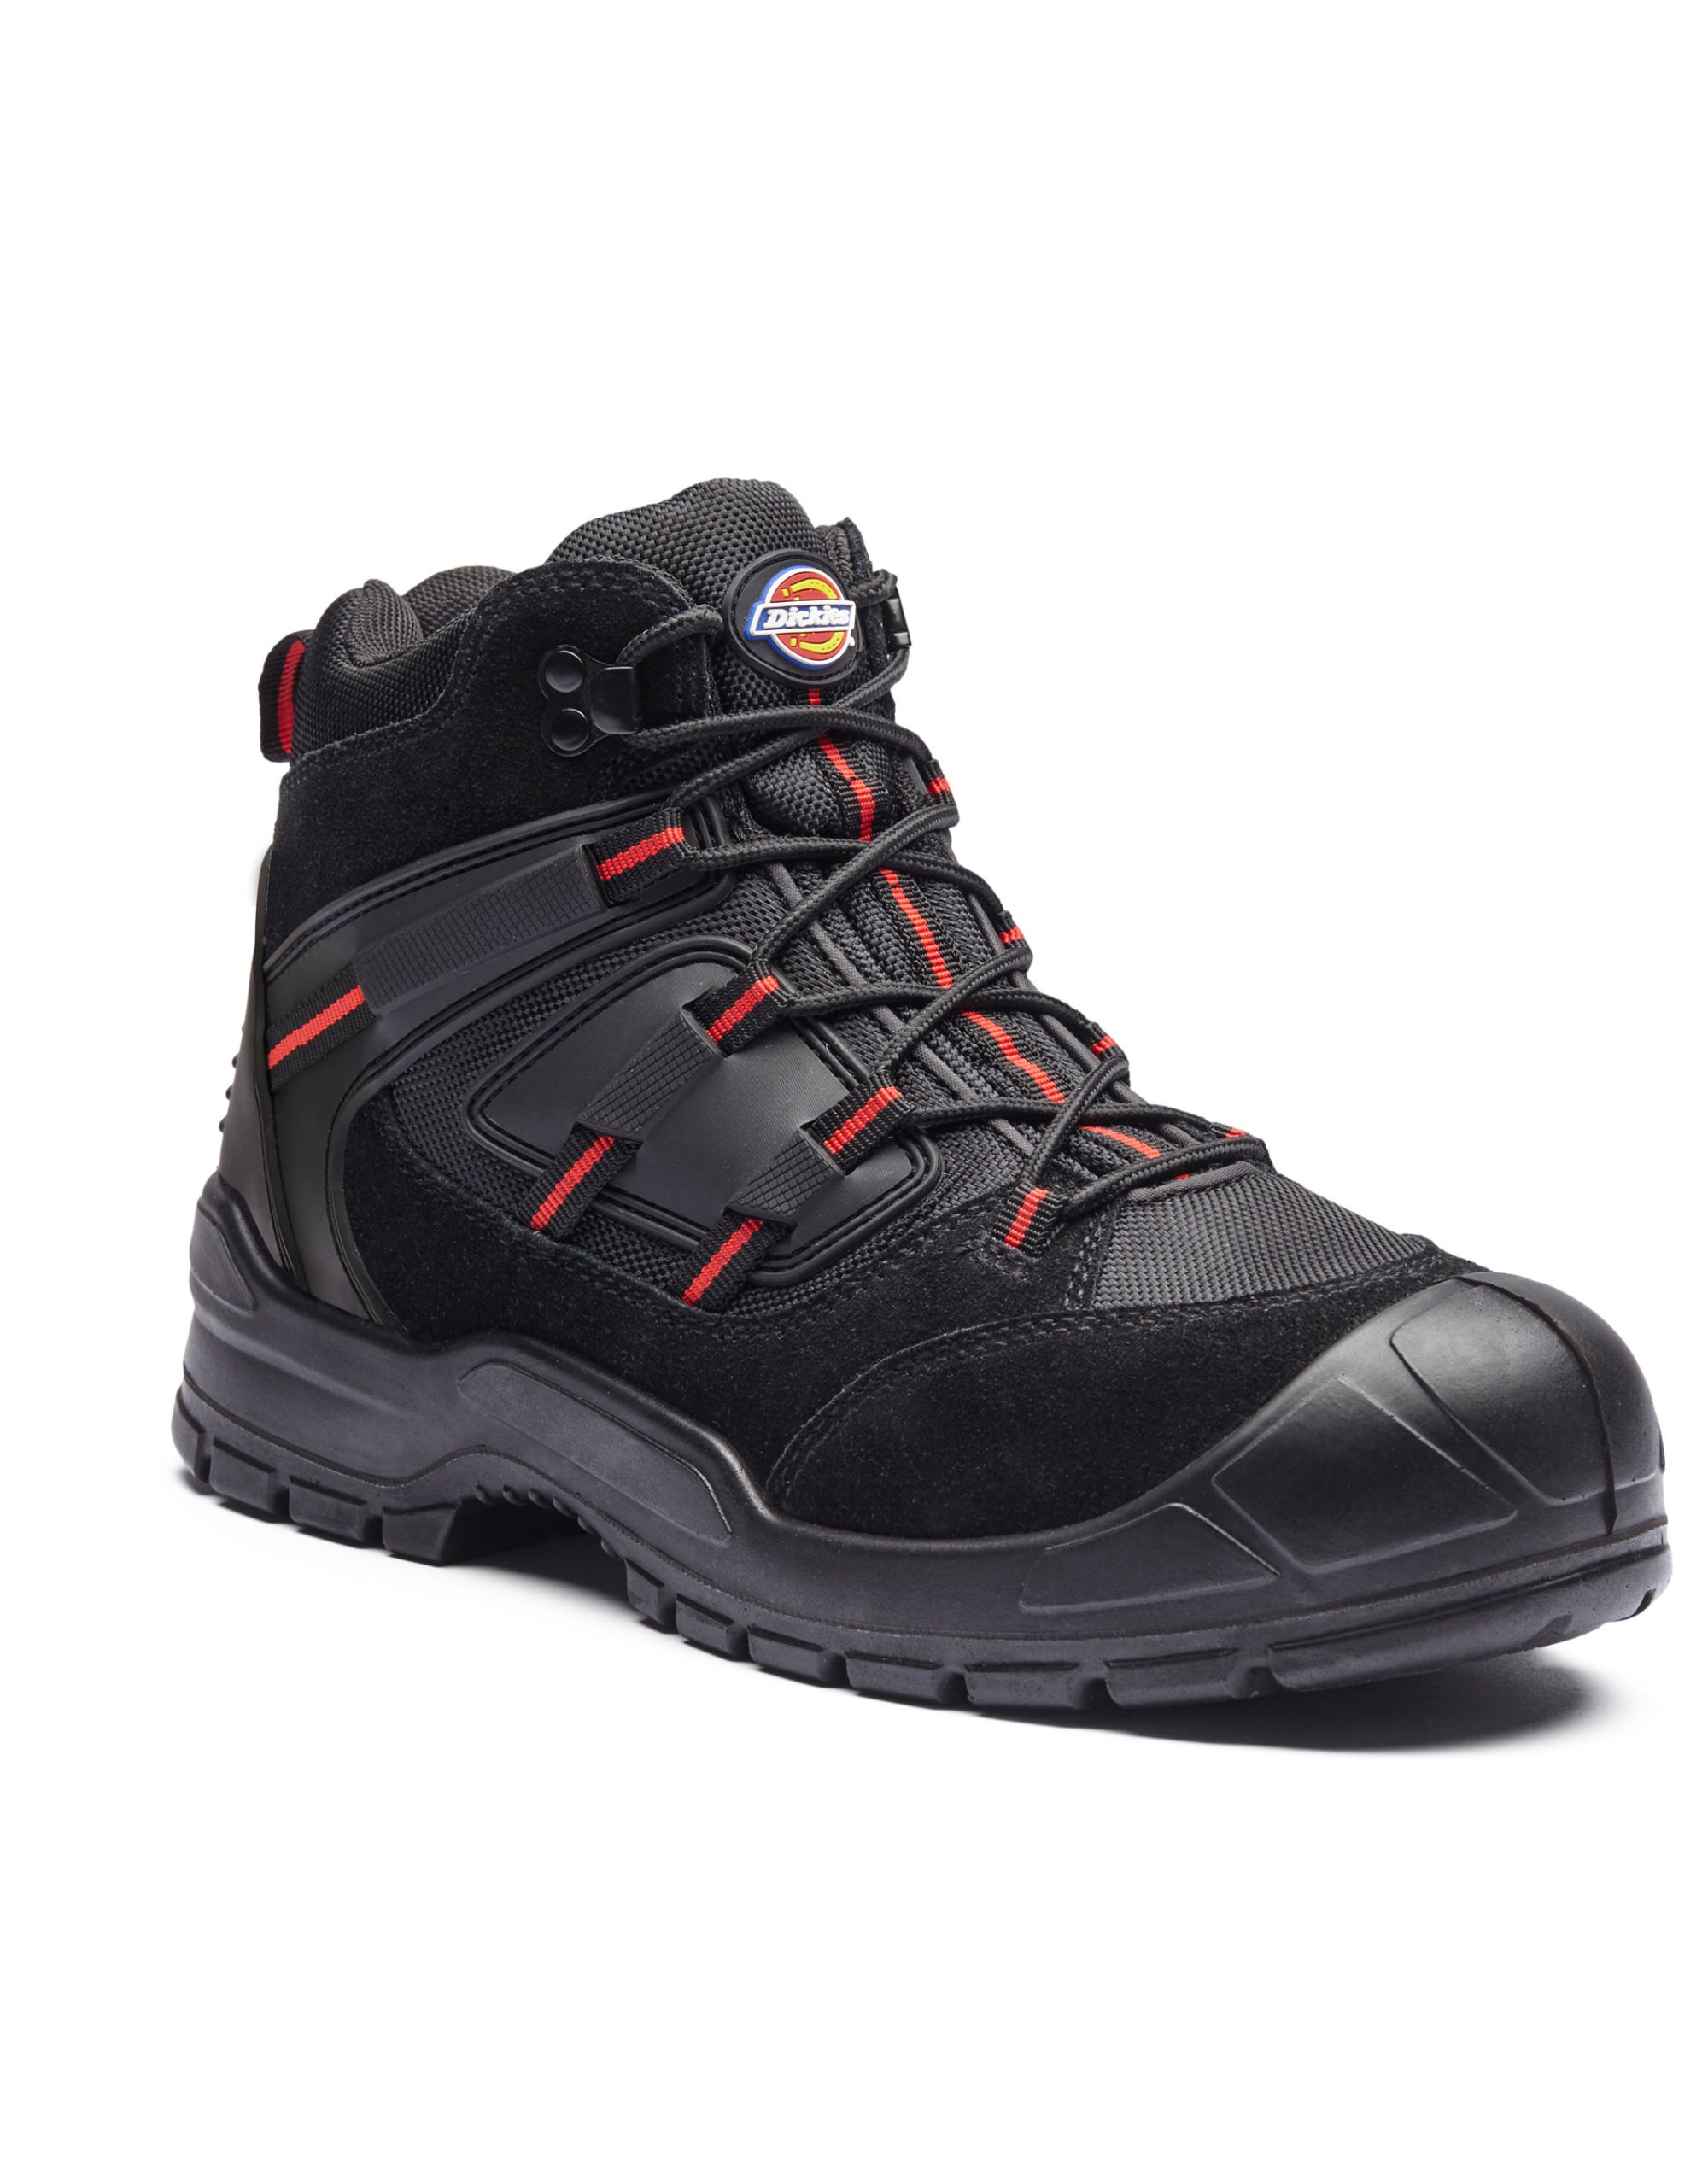 NEW STYLE Dickies Everyday Safety Work Hiker Boot FA24/7B 